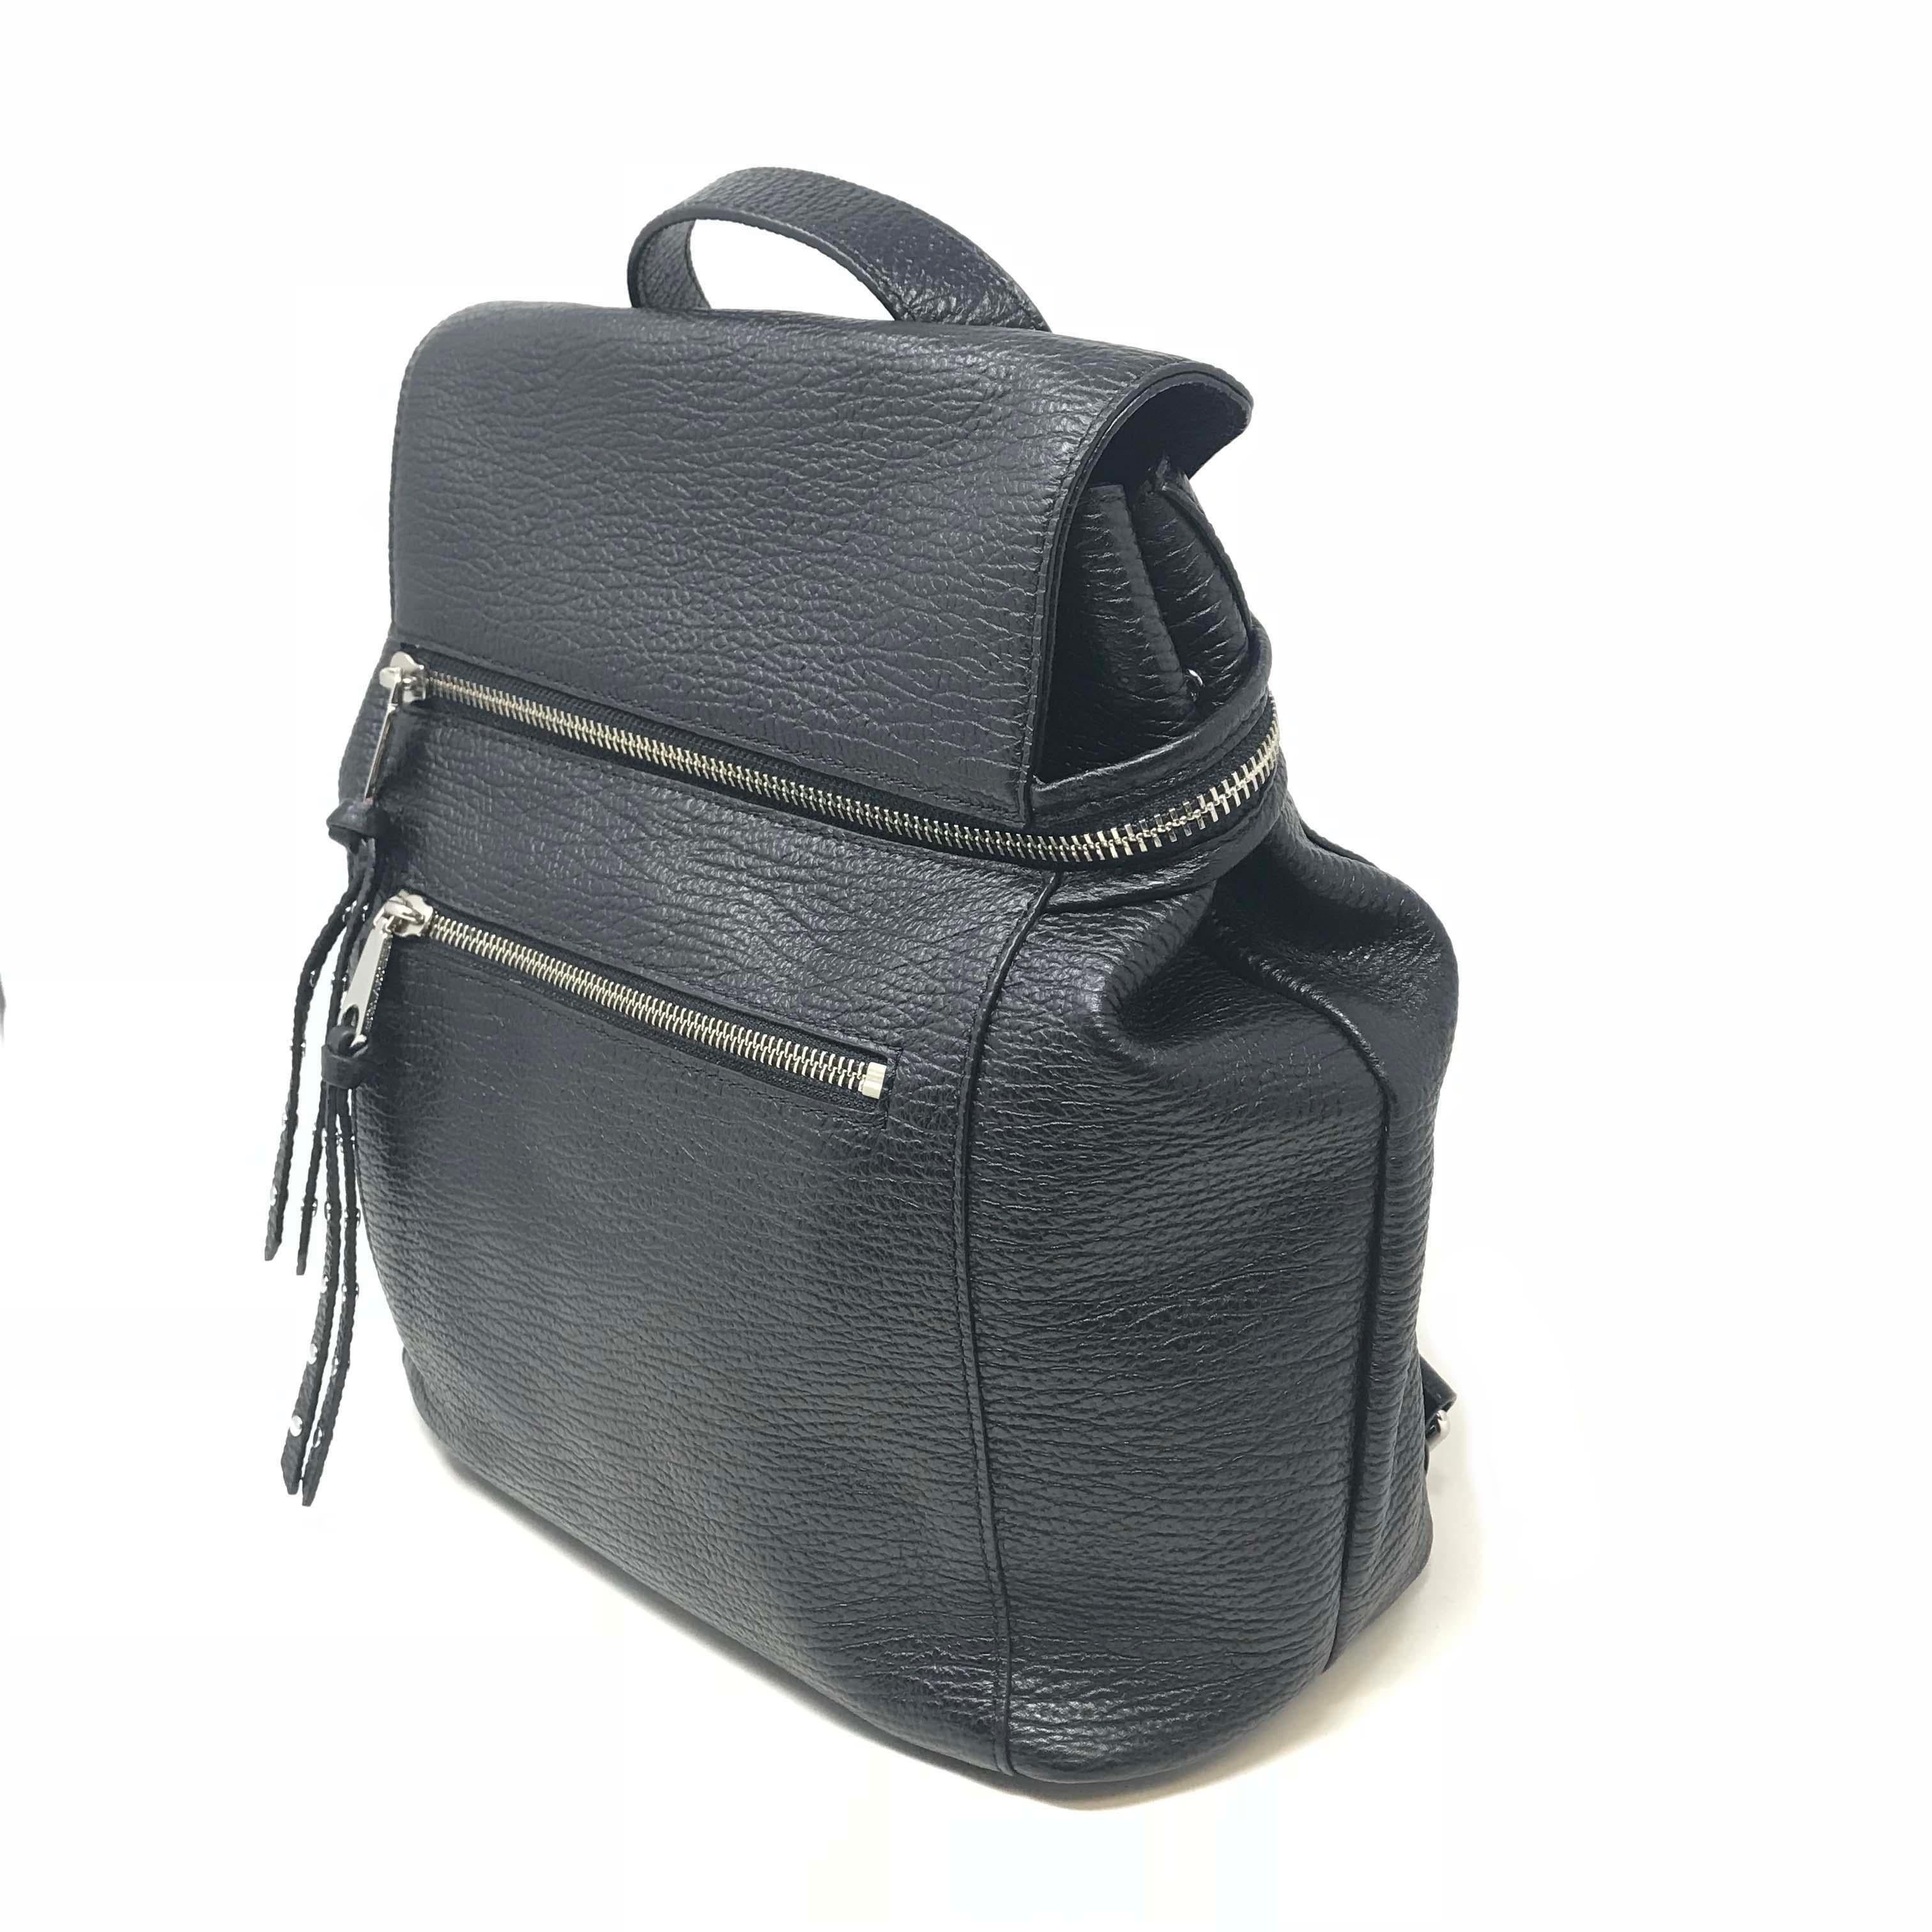 This is new Rebecca Minkoff Jane HF26EJAB31 Medium Black Leather Ladies Backpack. It's completed with black pebble leather and silver tone hardware. Opens and closes with a zipper, has 1 exterior and 1 interior zip pockets, as well as 3 interior